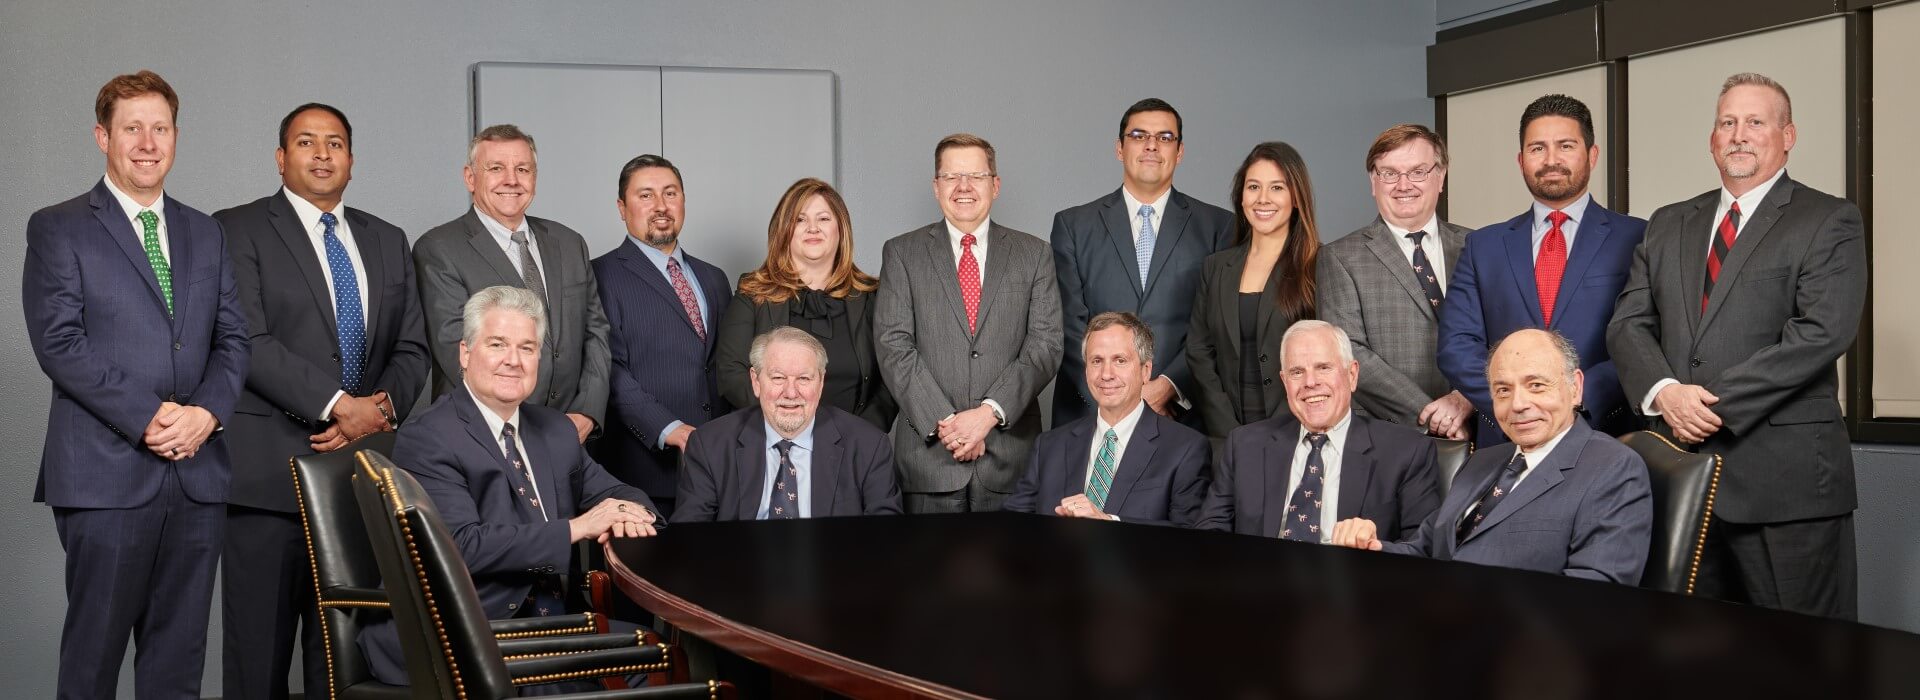 2019 Super Lawyers and Texas Rising Stars